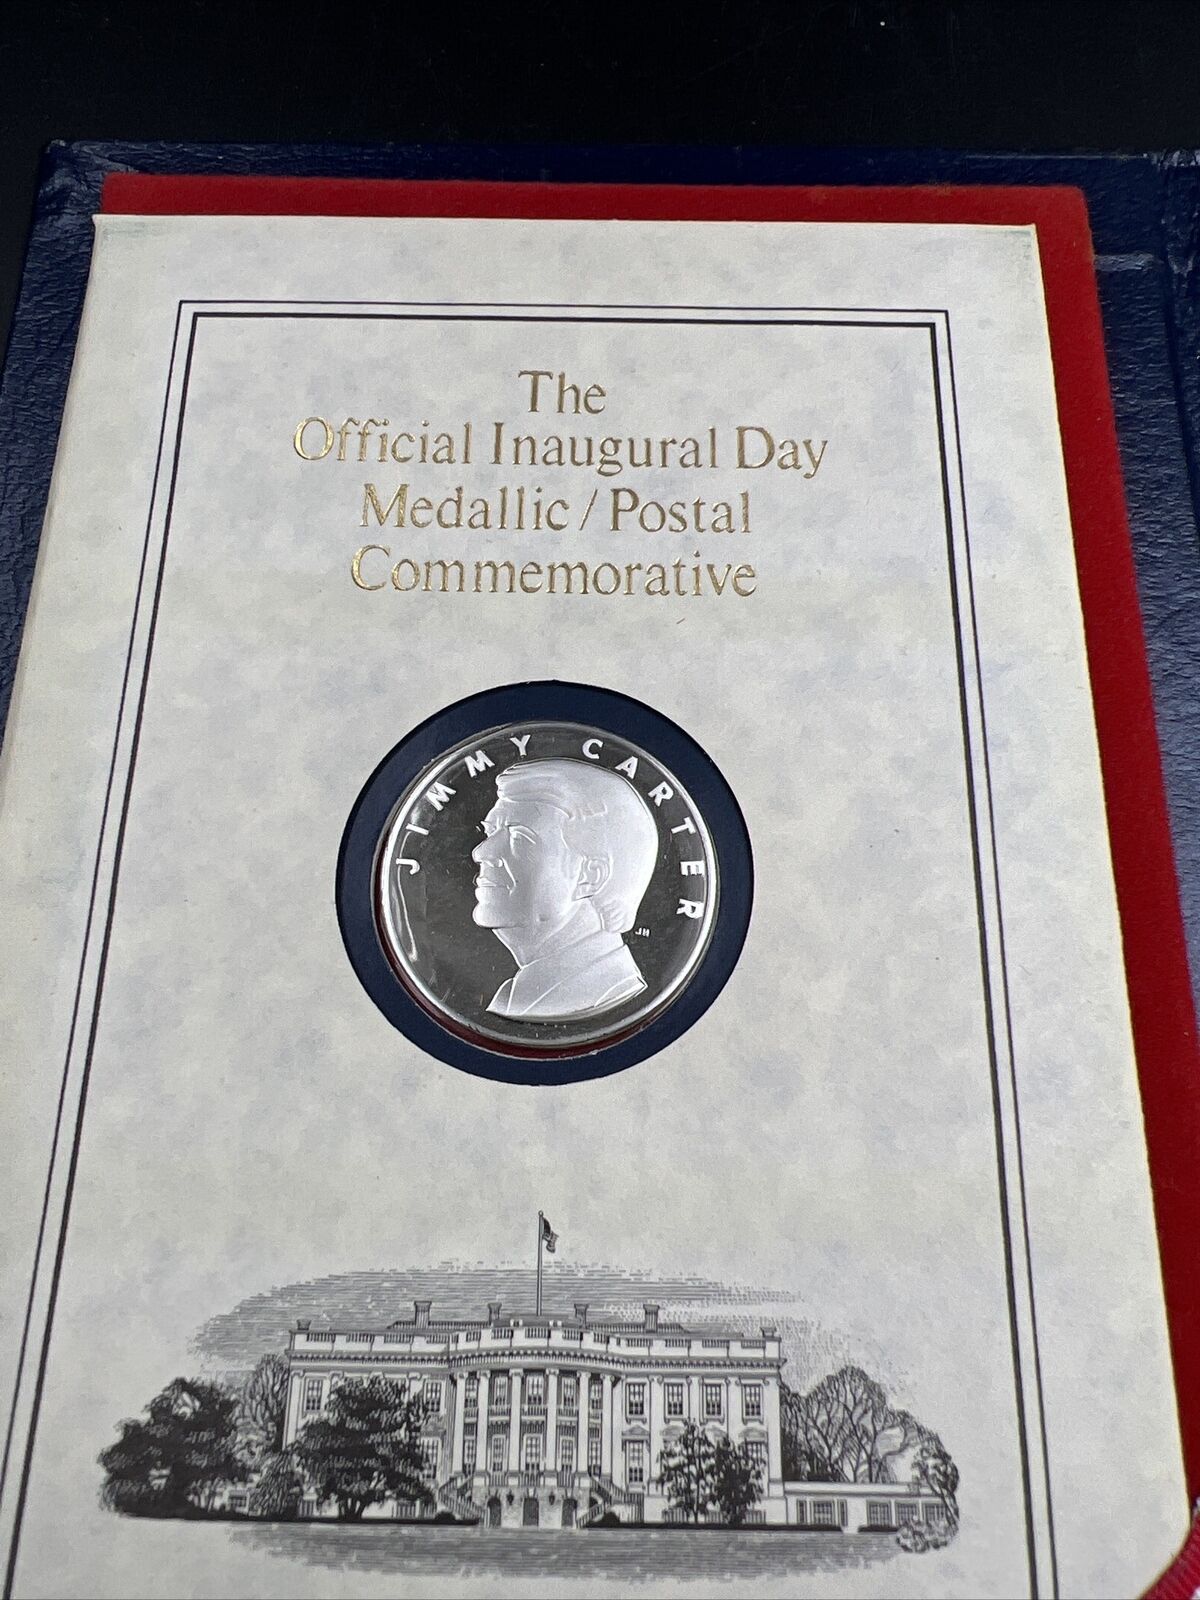 Jimmy Carter 1977 The Official Inaugural Day Medallic Postal Commemorative Coin